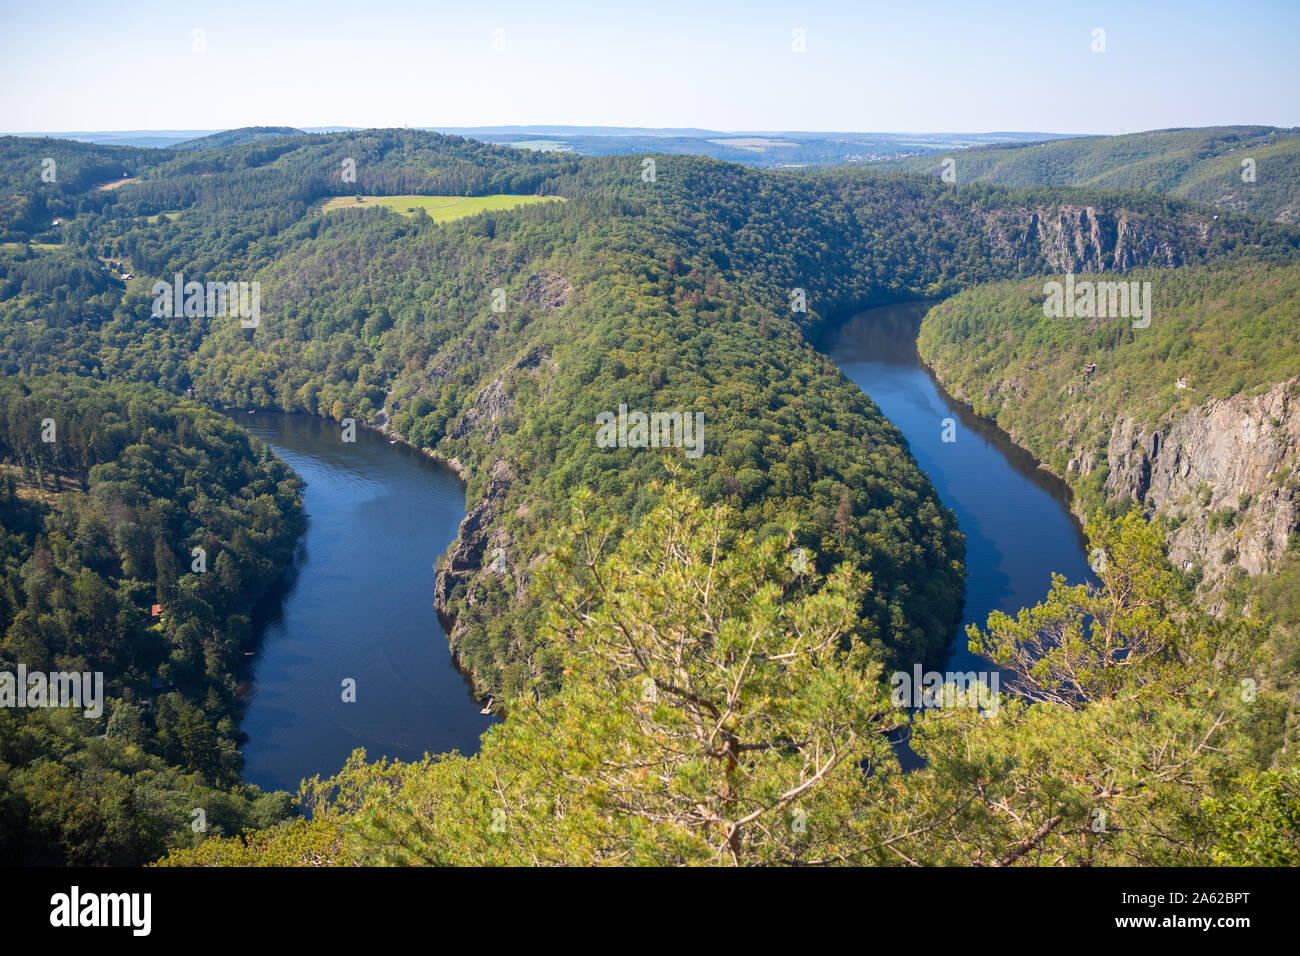 Aerial view of Vltava river horseshoe shape meander from Maj viewpoint in Czech Republic Stock Photo